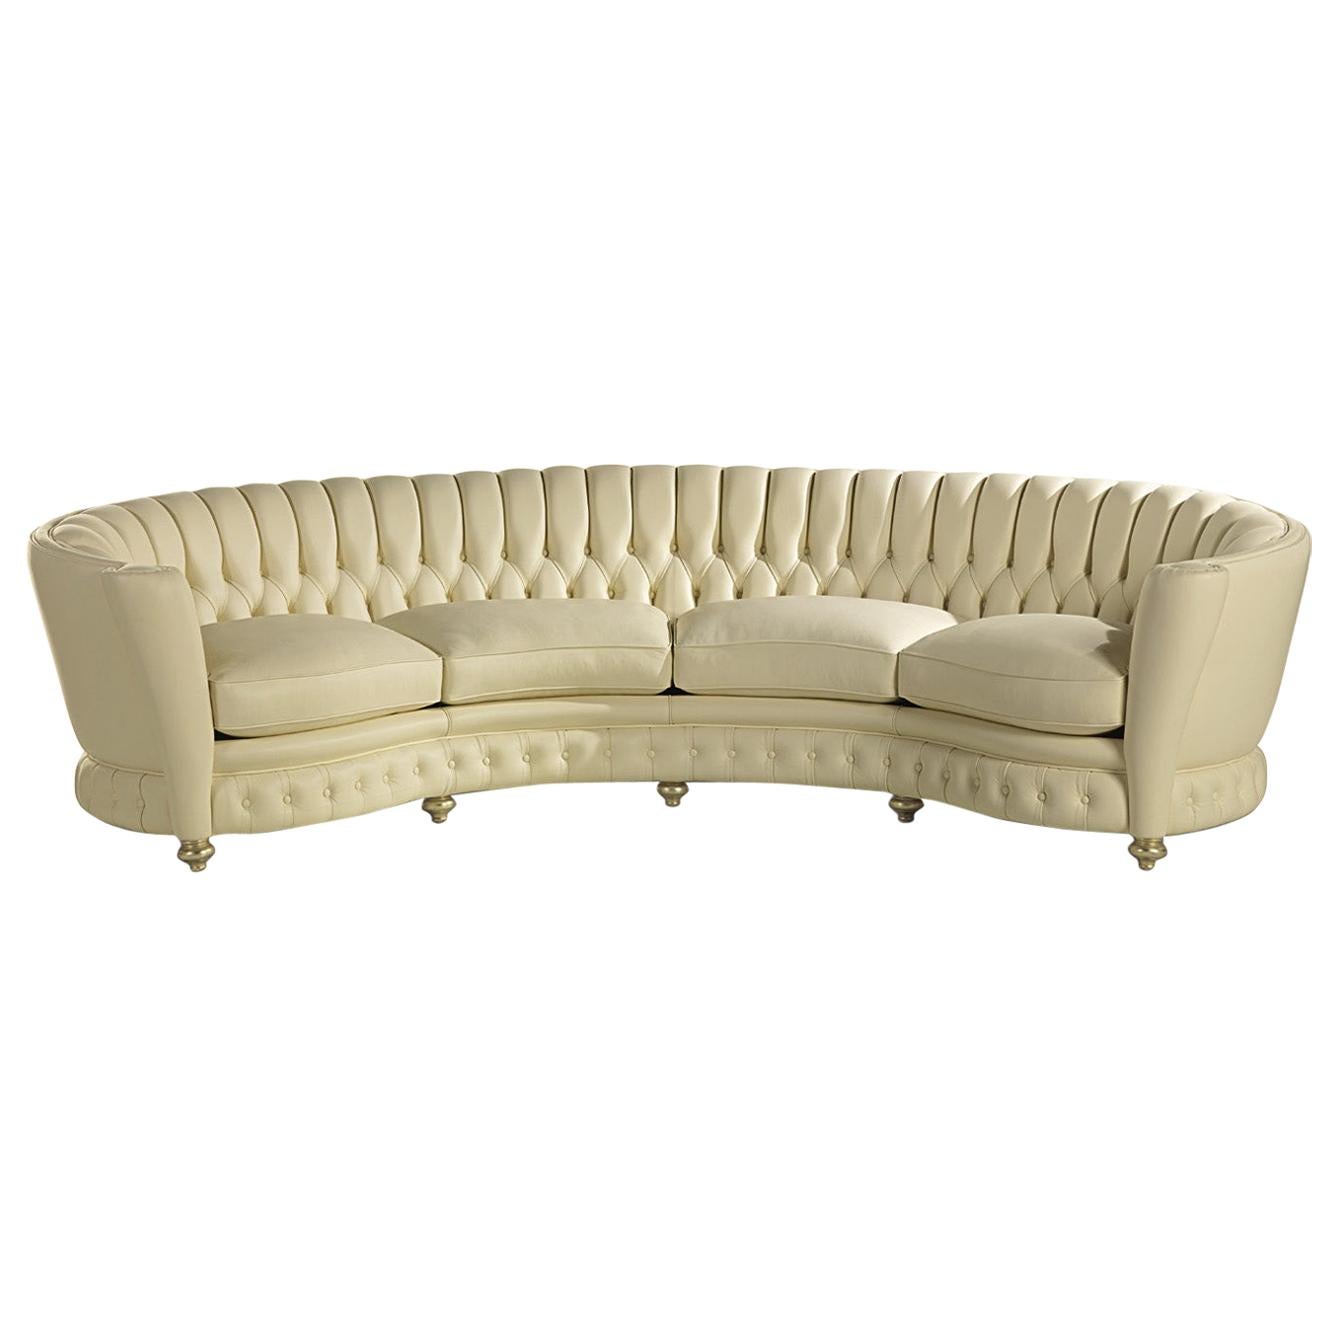 Millennium Four-Seat Leather Sofa with Button Tufting & Gold Finish by Zanaboni